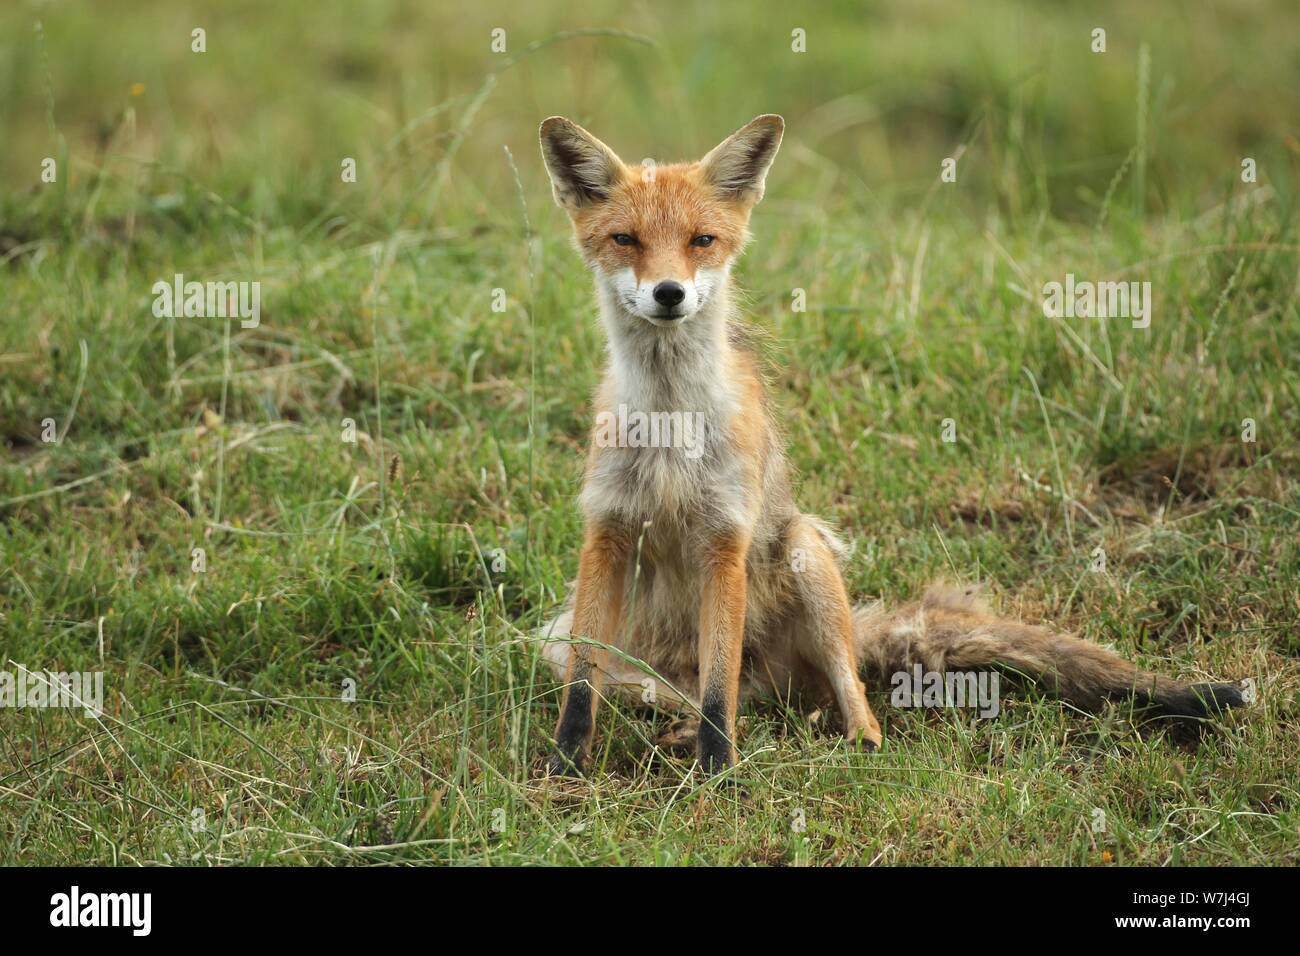 Red fox (Vulpes vulpes) Start of mange, infested by itch mites (Sarcoptes scabiei), Allgau, Bavaria, Germany Stock Photo